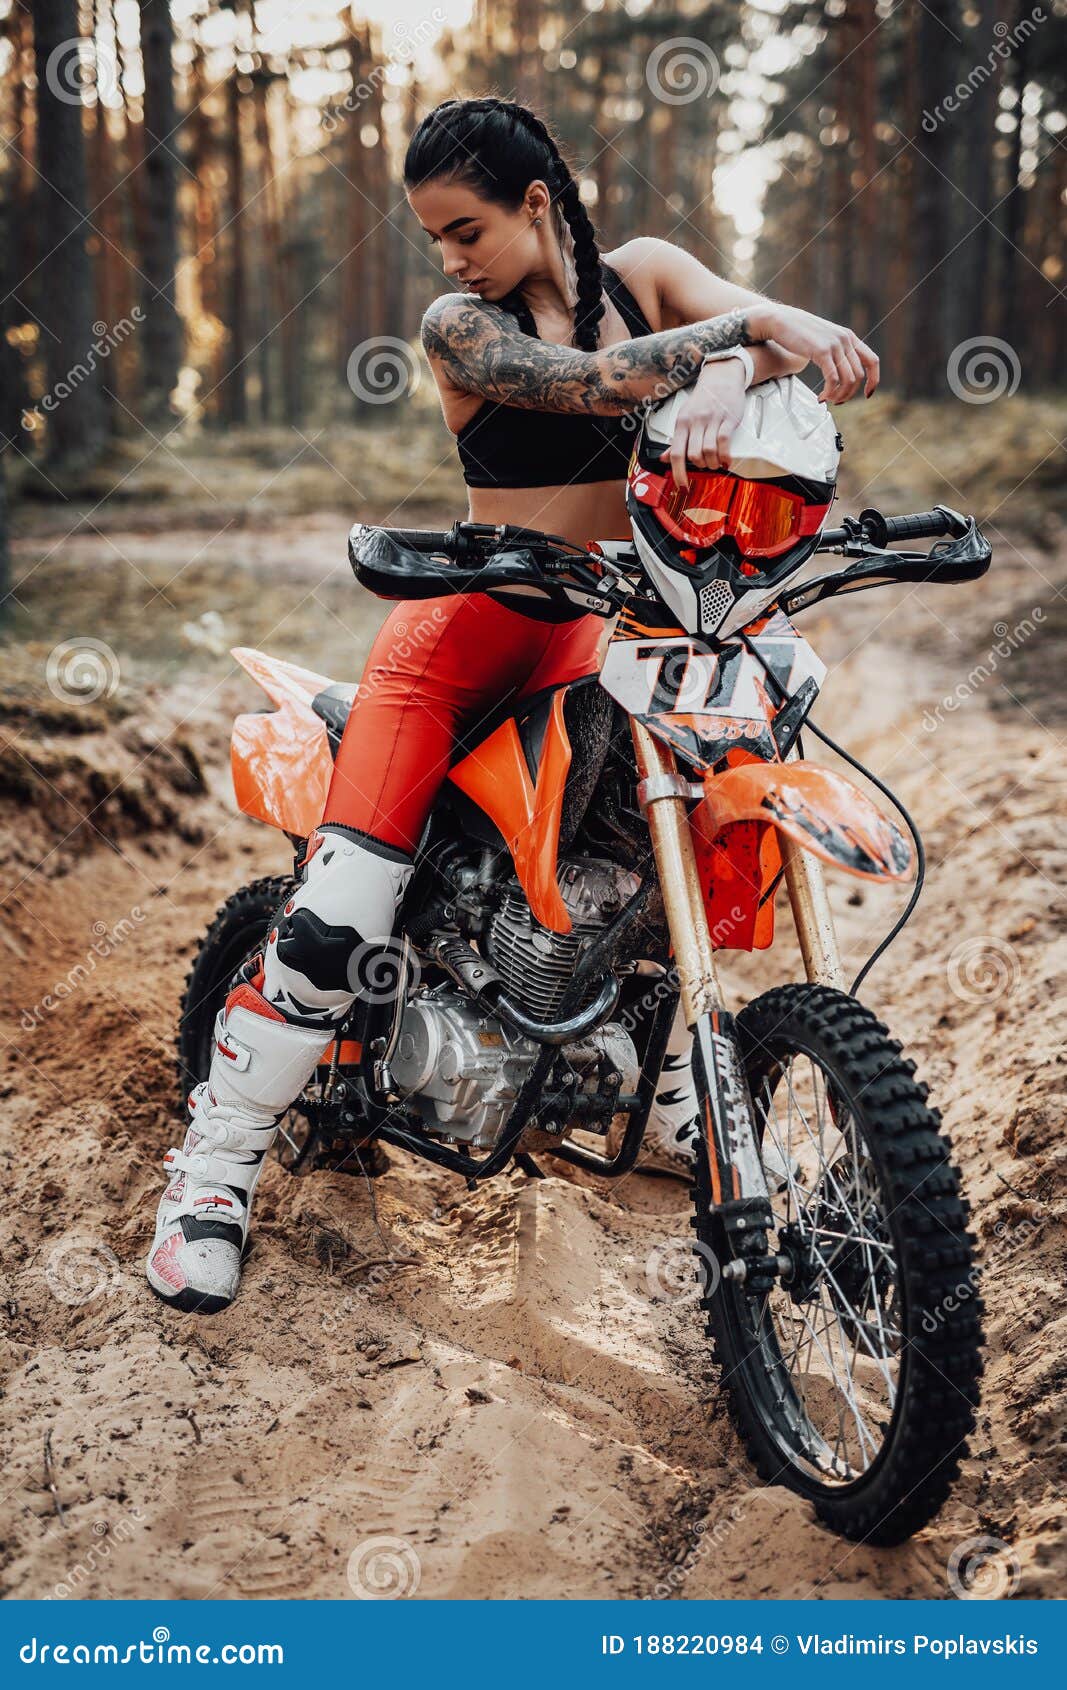 naked girl dirt bike riding a motorcycle